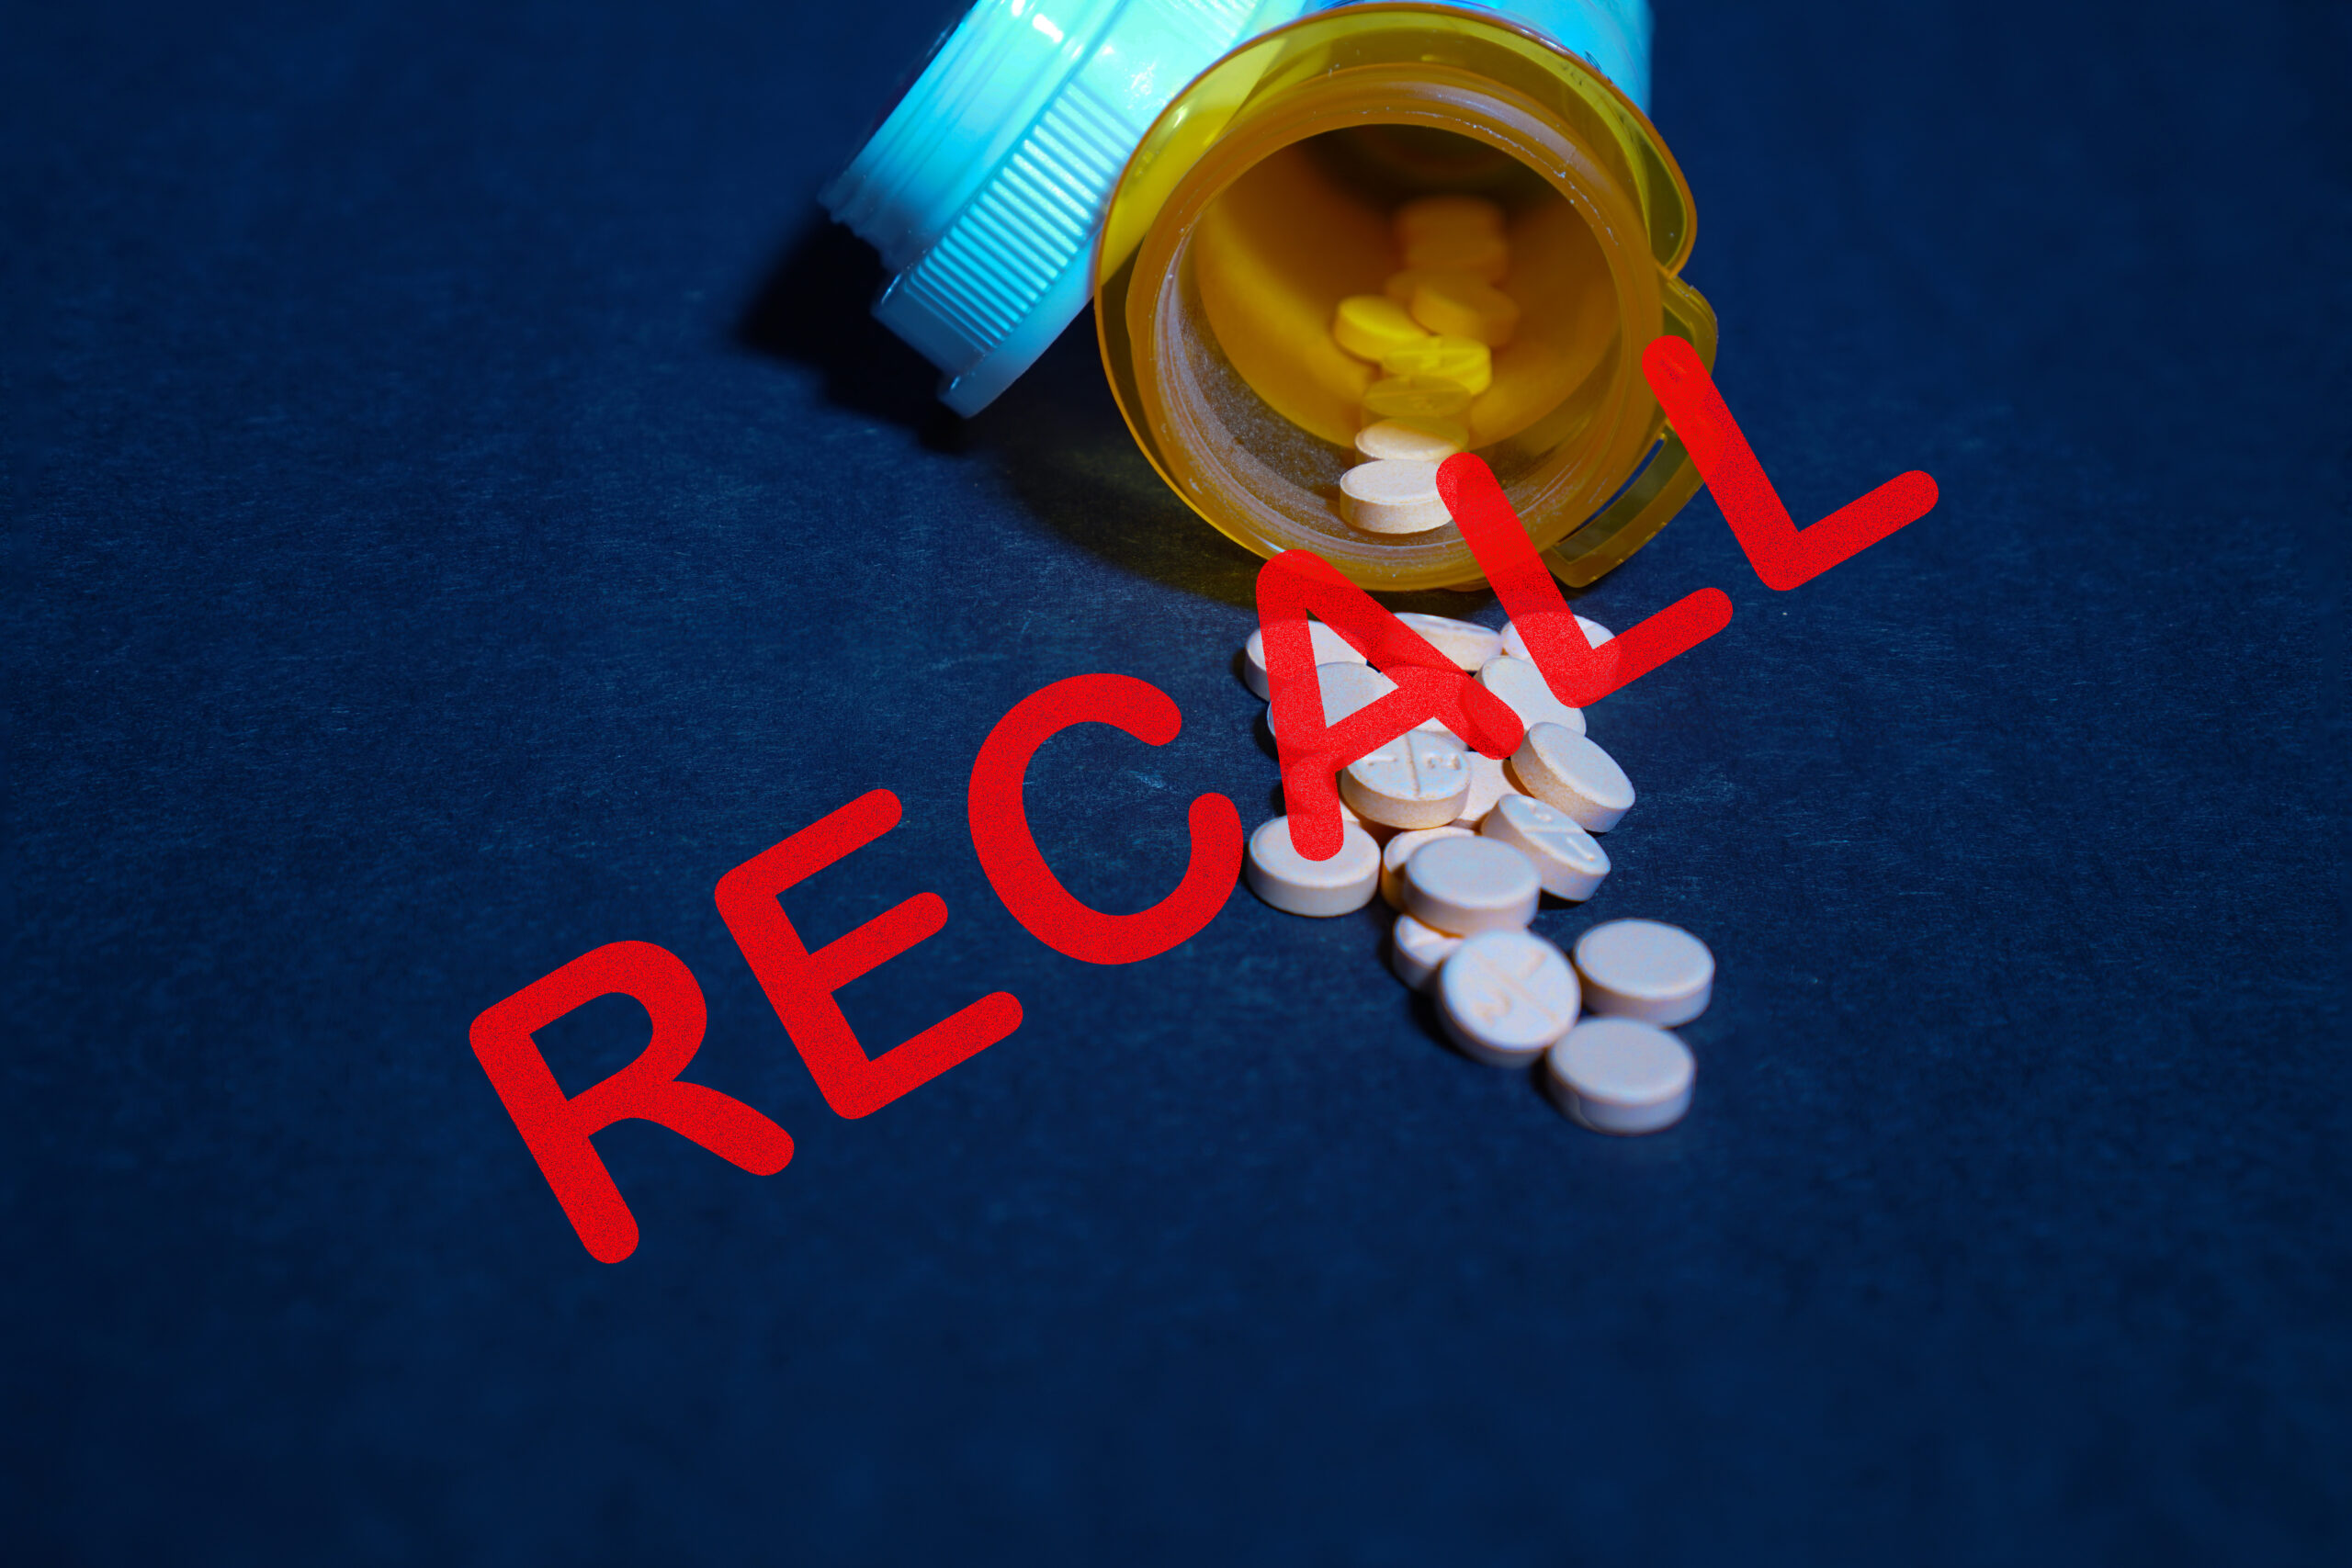 Pills spilling out of container with the word Recall written across